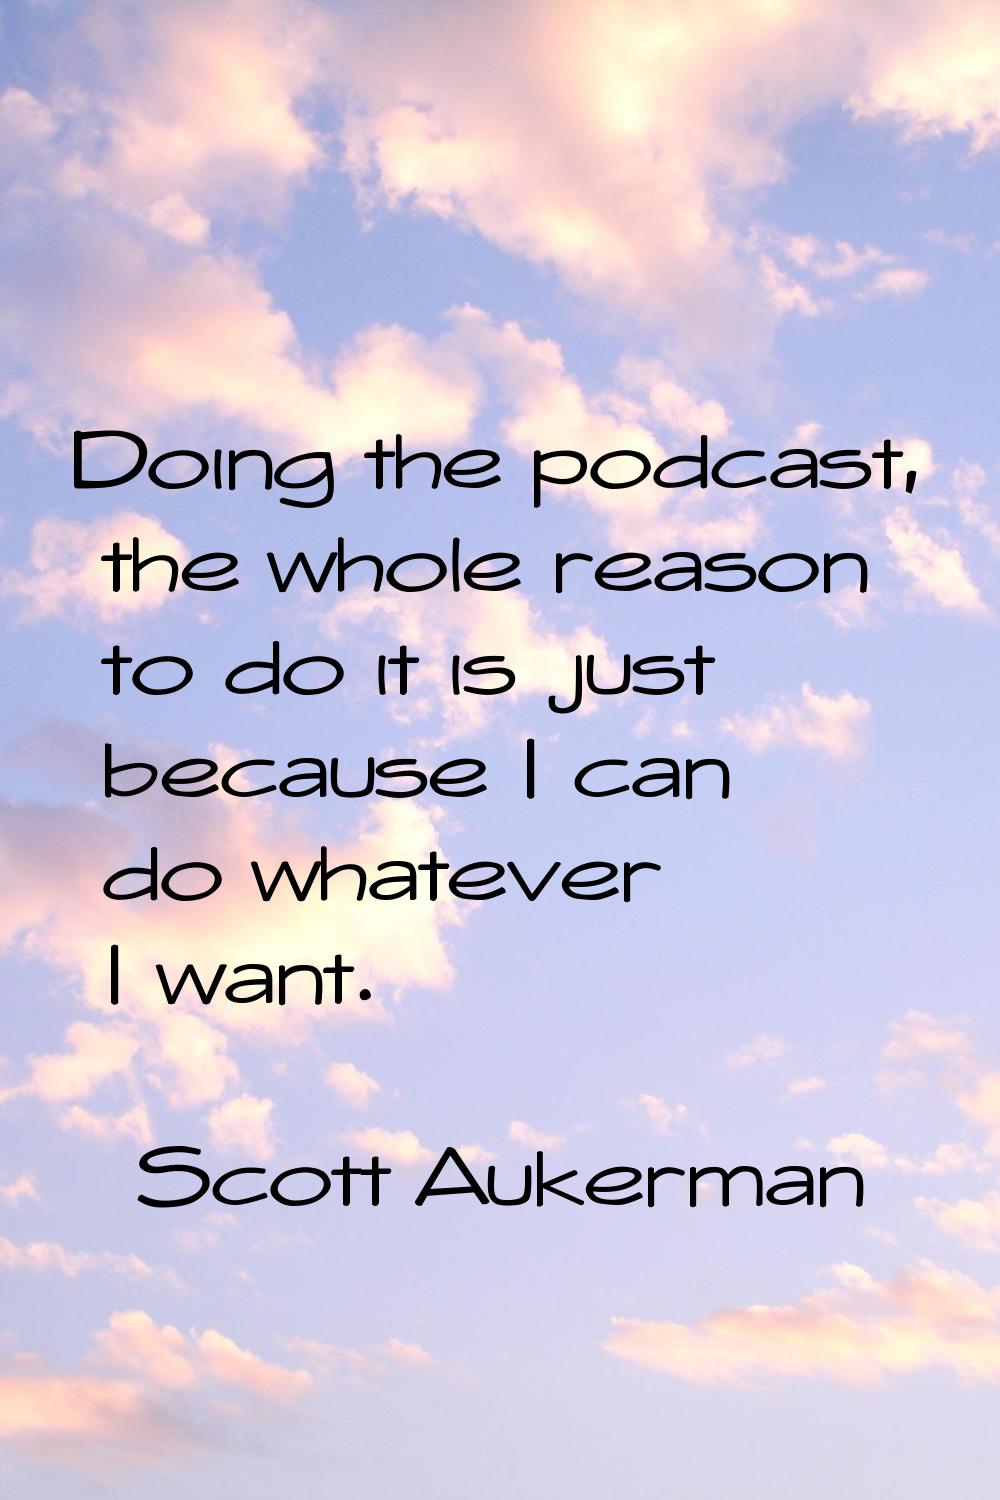 Doing the podcast, the whole reason to do it is just because I can do whatever I want.